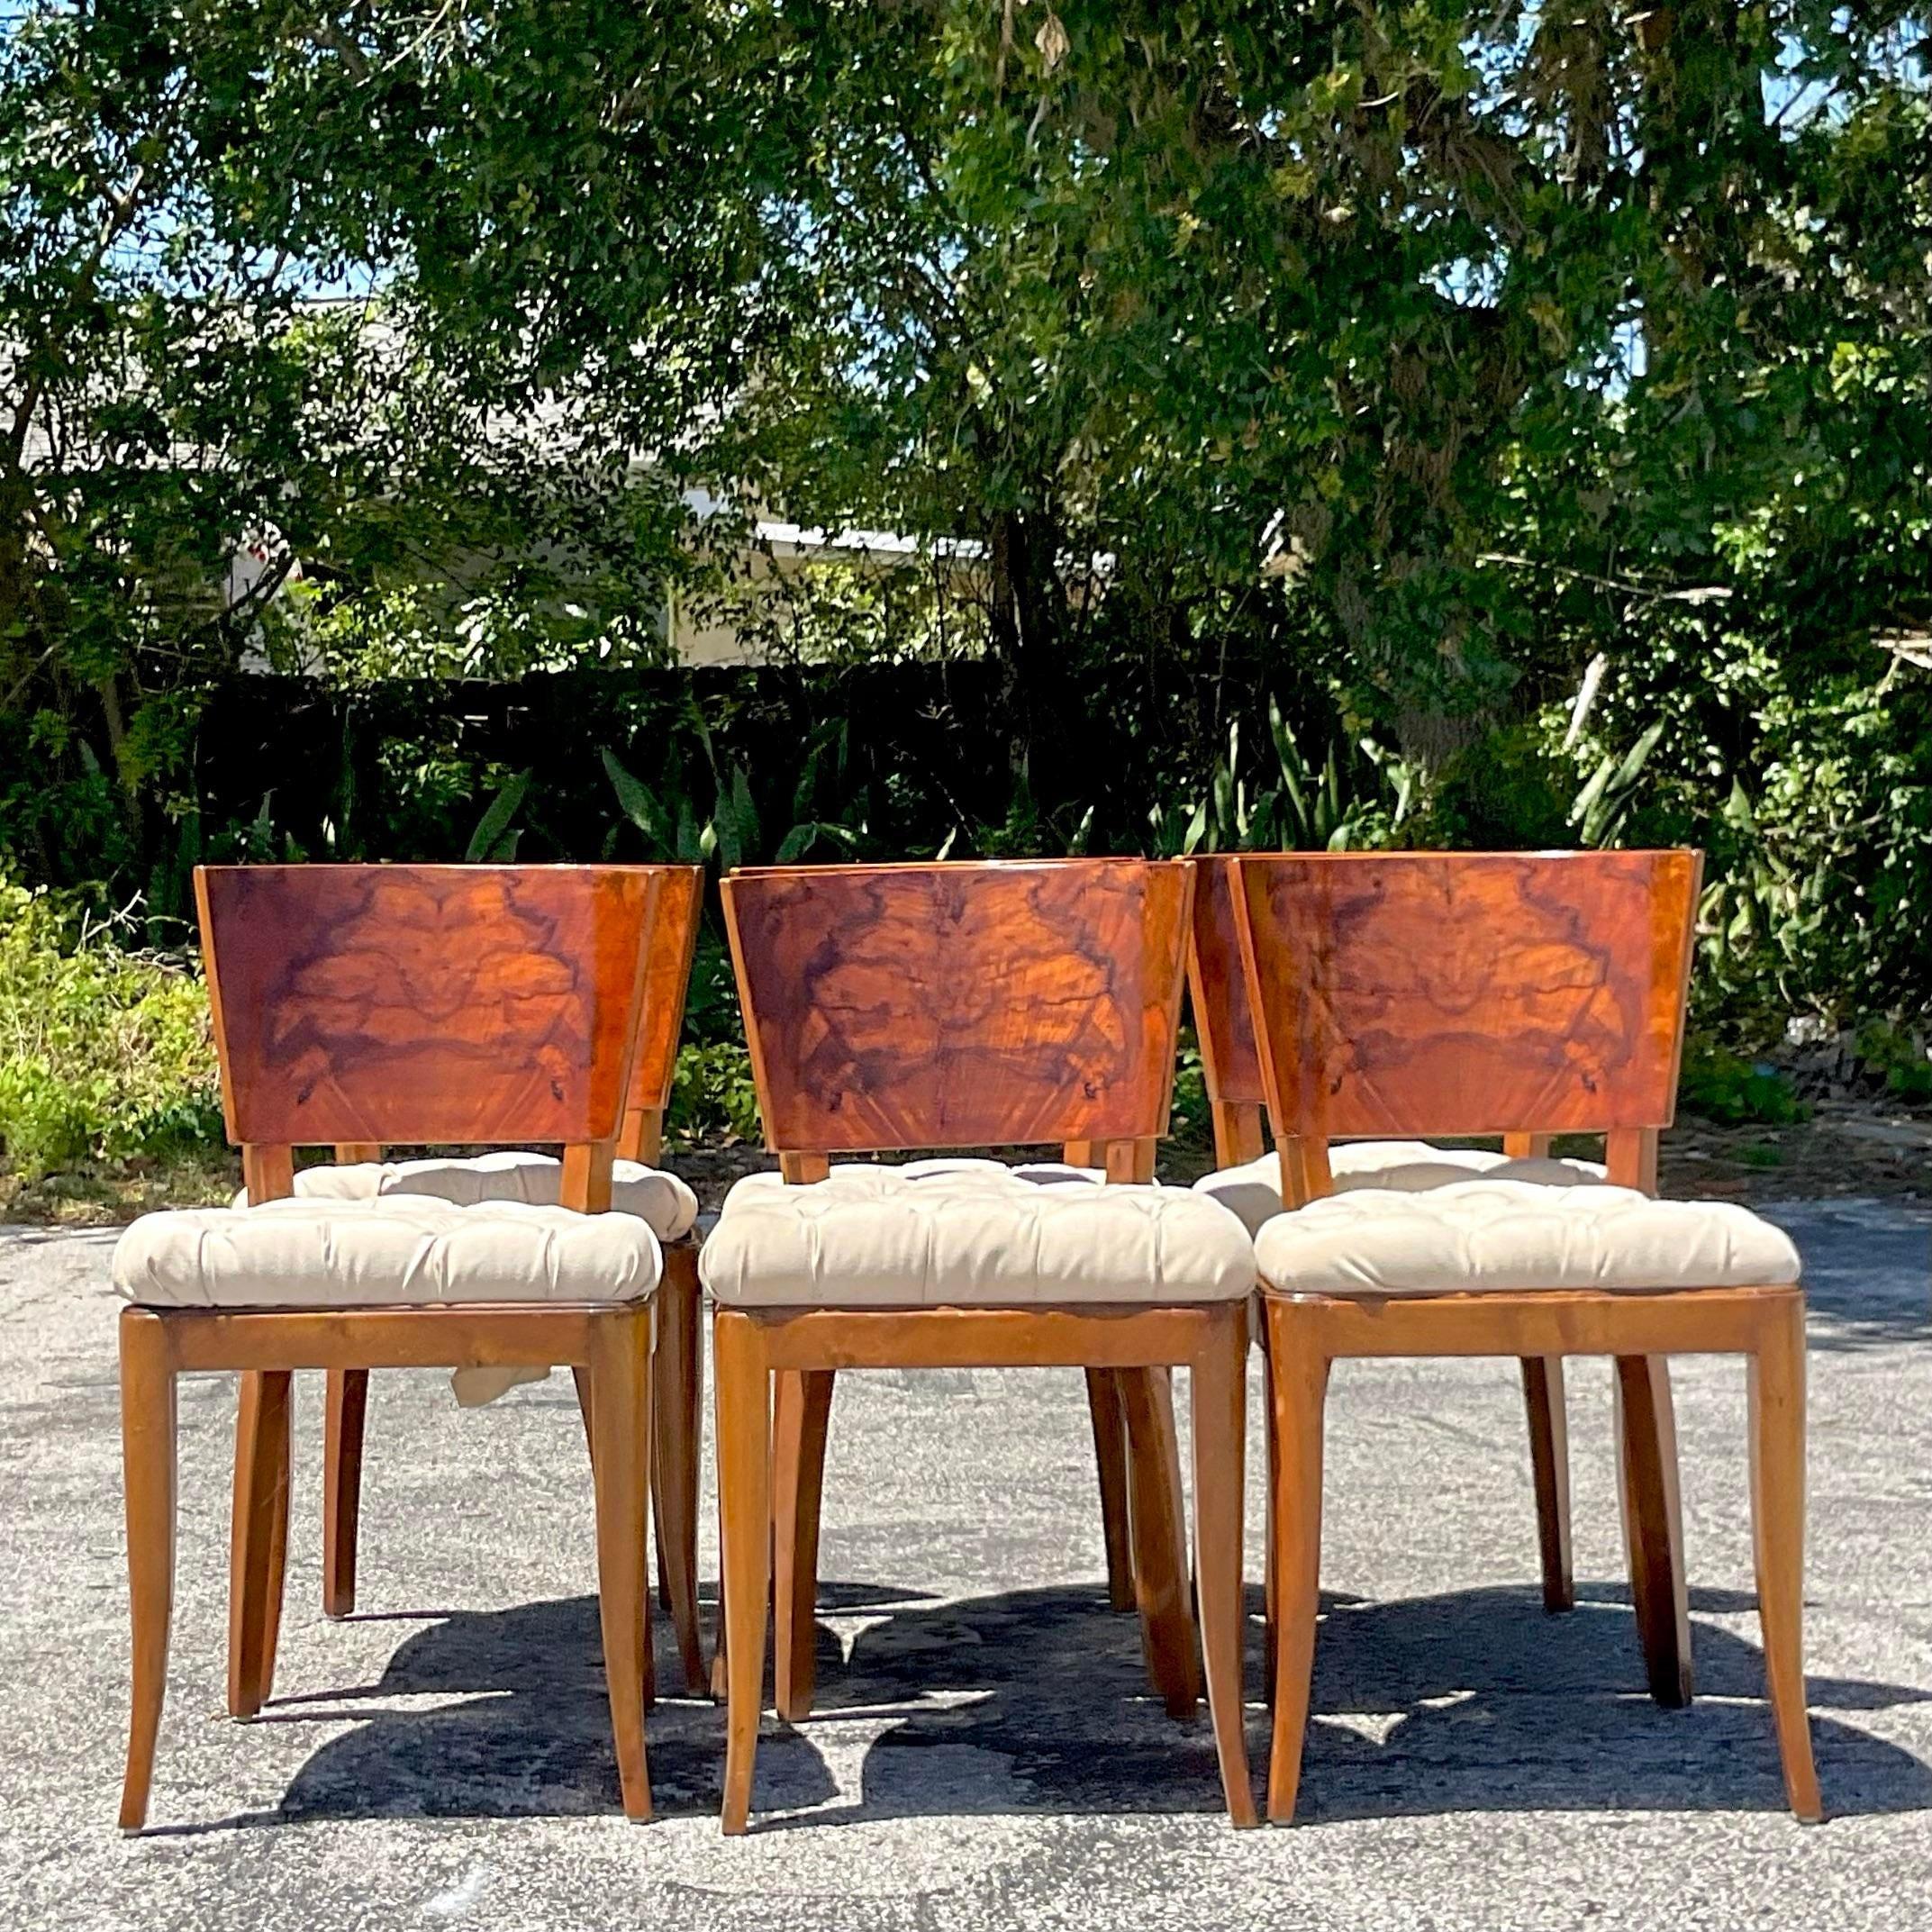 American Vintage Deco Burl Wood Dining Chairs - Set of 6